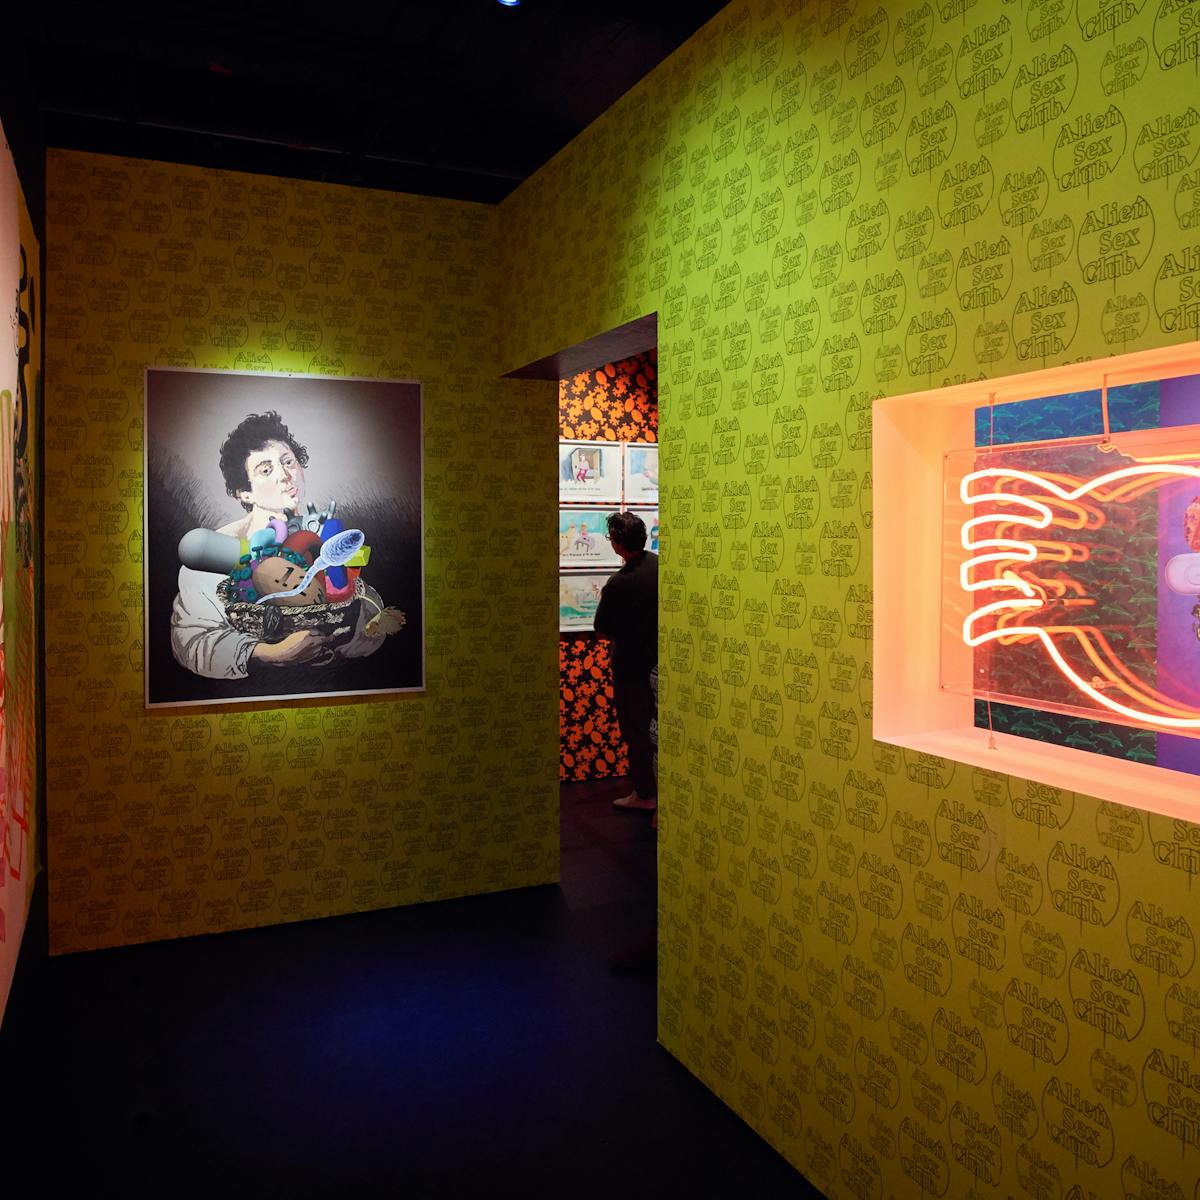 Photograph of a visitor in the distance looking at framed artworks on the wall. In the foreground is colourful patterned wallpaper, a work of art and a red neon exhibit.